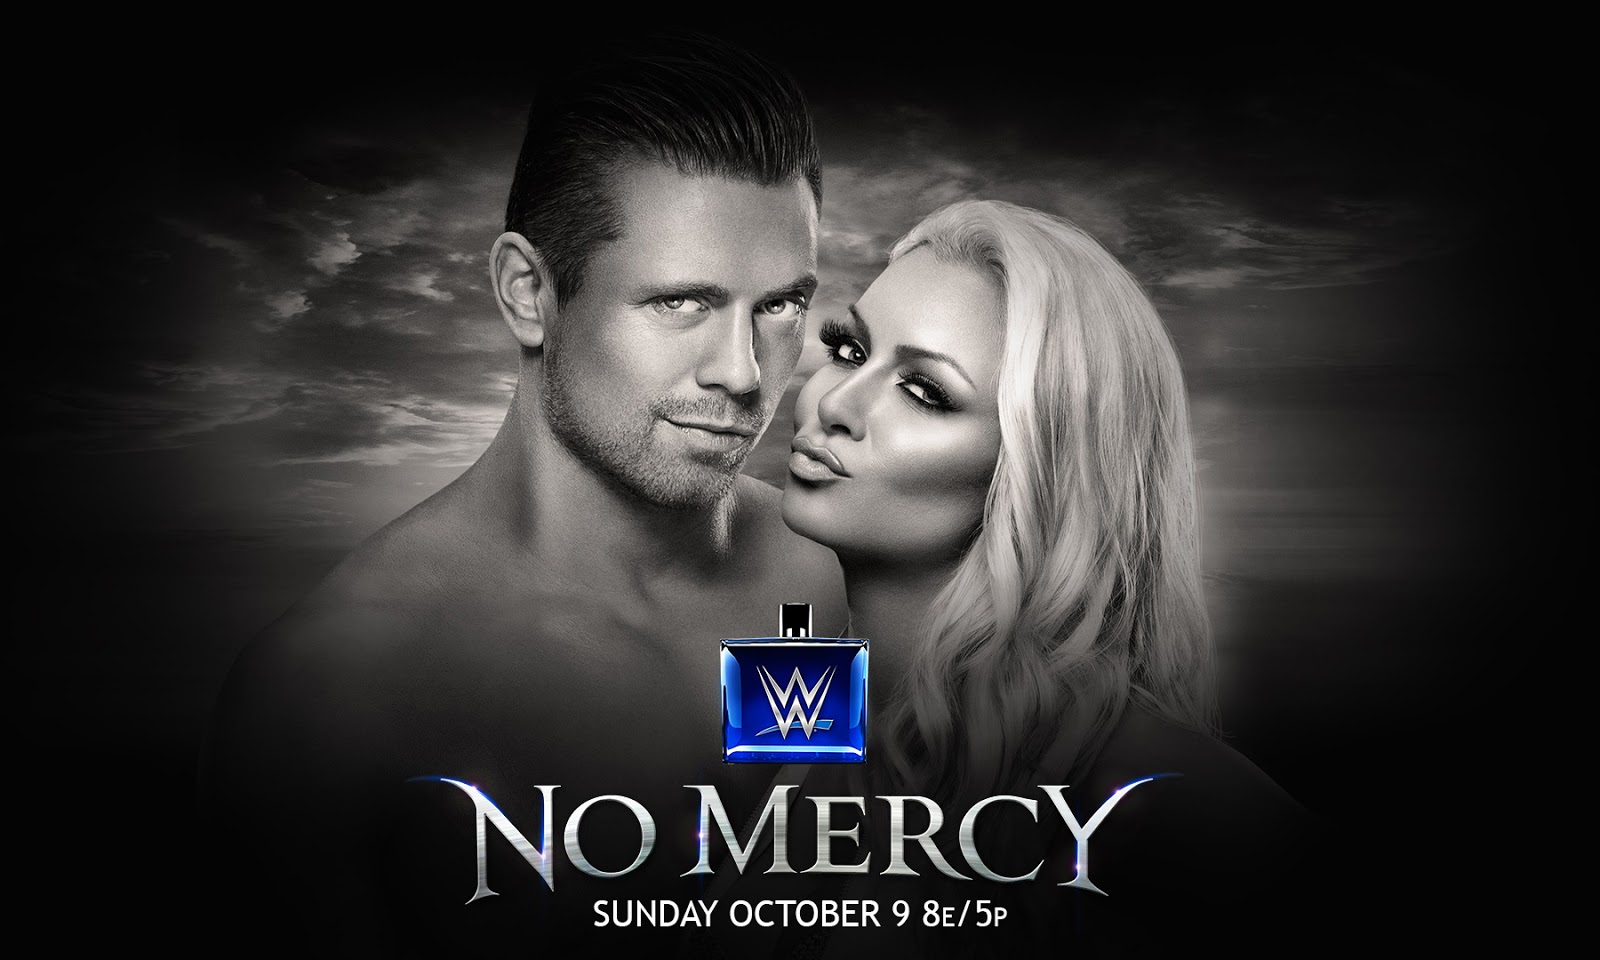 no mercy wallpaper,movie,poster,romance,flash photography,album cover